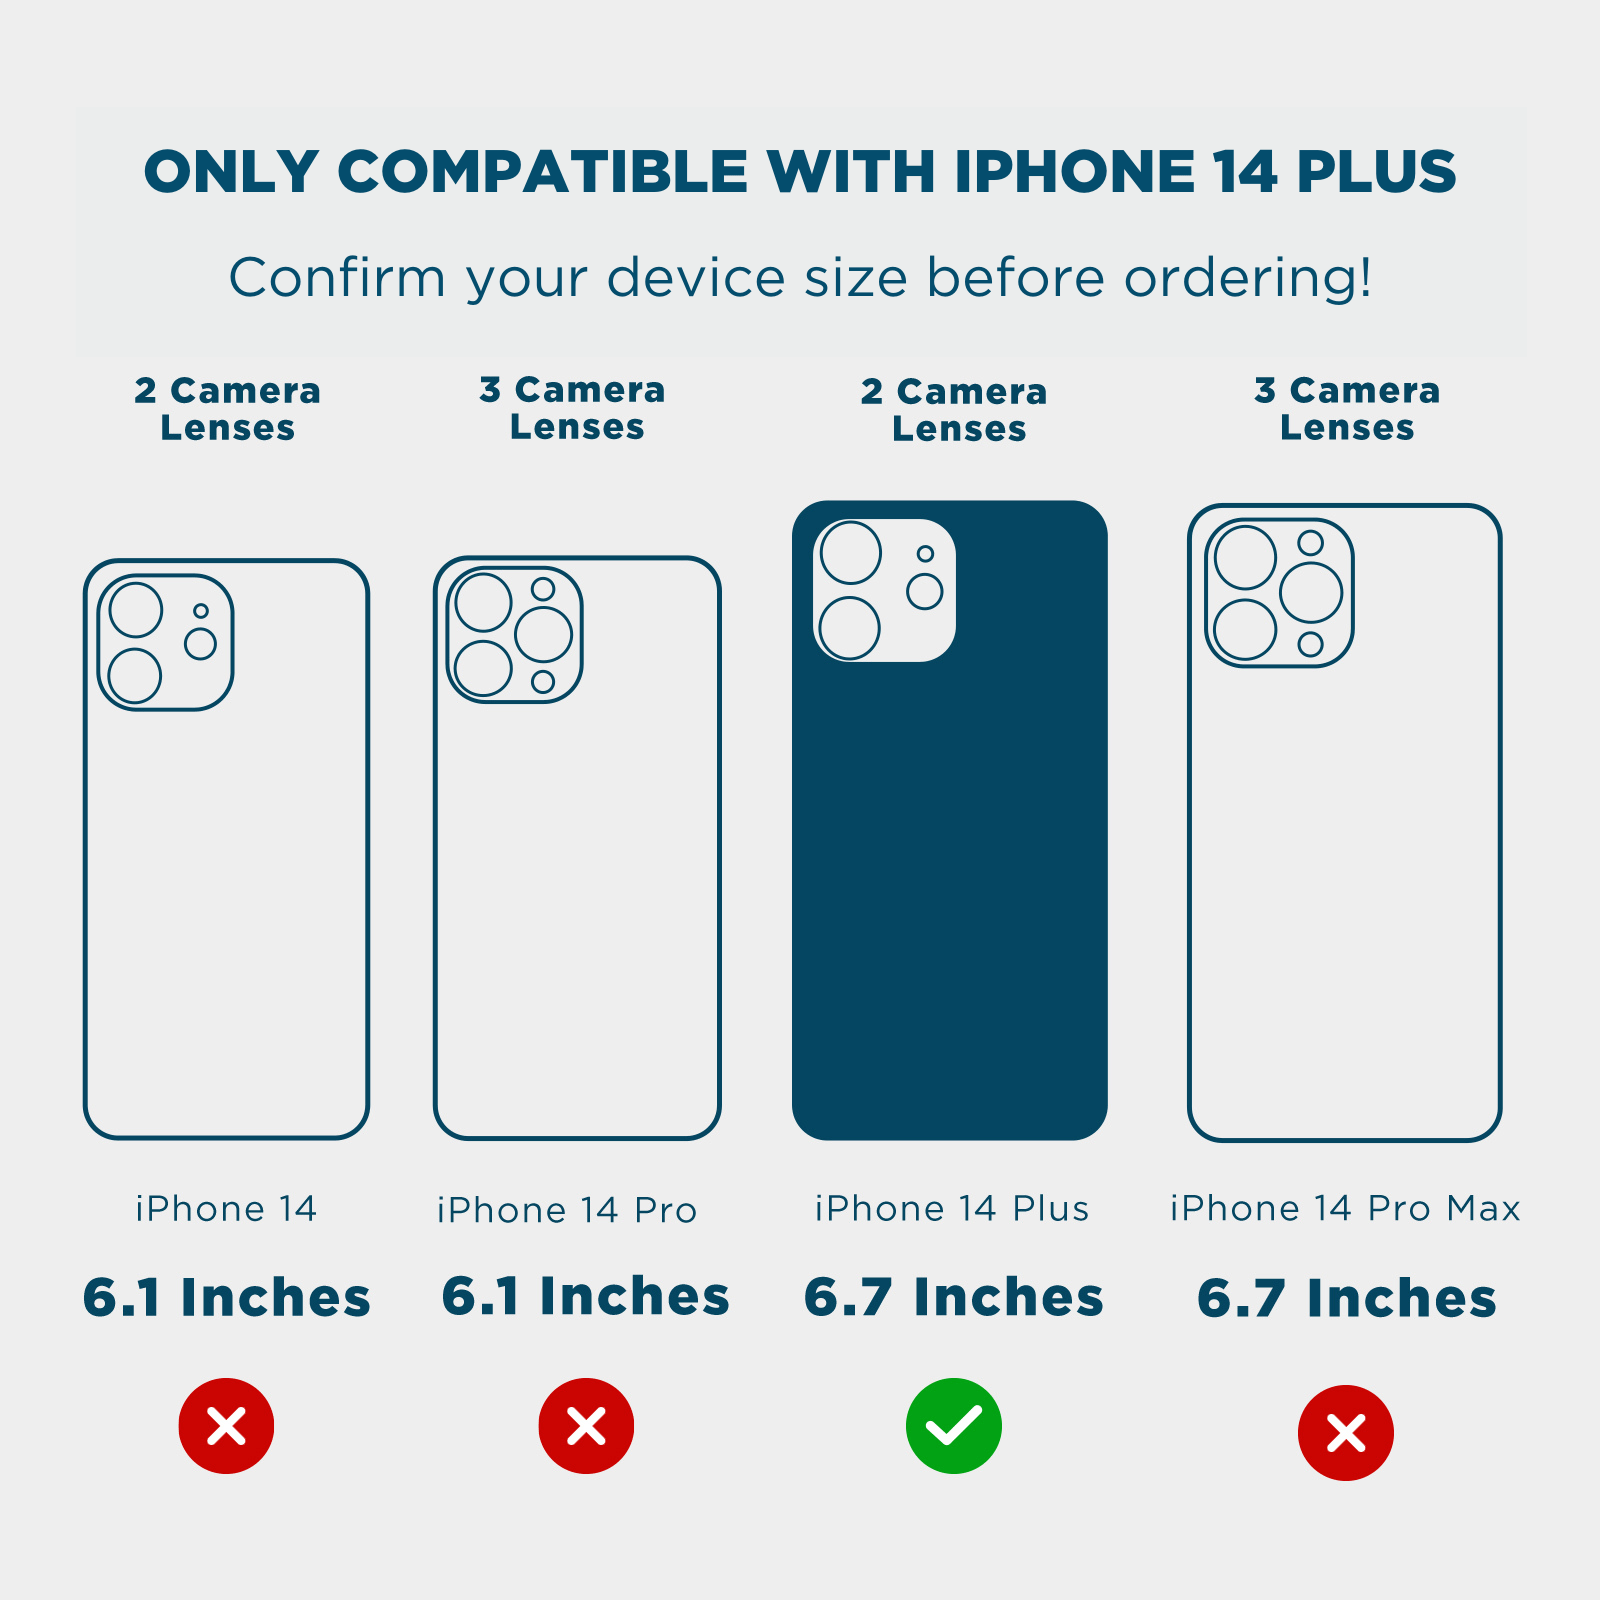 ONLY COMPATIBLE WITH IPHONE 14 PLUS. CONFIRM YOUR DEVICE SIZE BEFORE ORDERING! 2 CAMERA LENSES, 3 CAMERA LENSES, 2 CAMERA LENSES, 3 CAMERA LENSES, 6.1 INCHEC, 6.1 INCHES, 6.7 INCHES, 6.7 INCHES. COLOR::GOLD